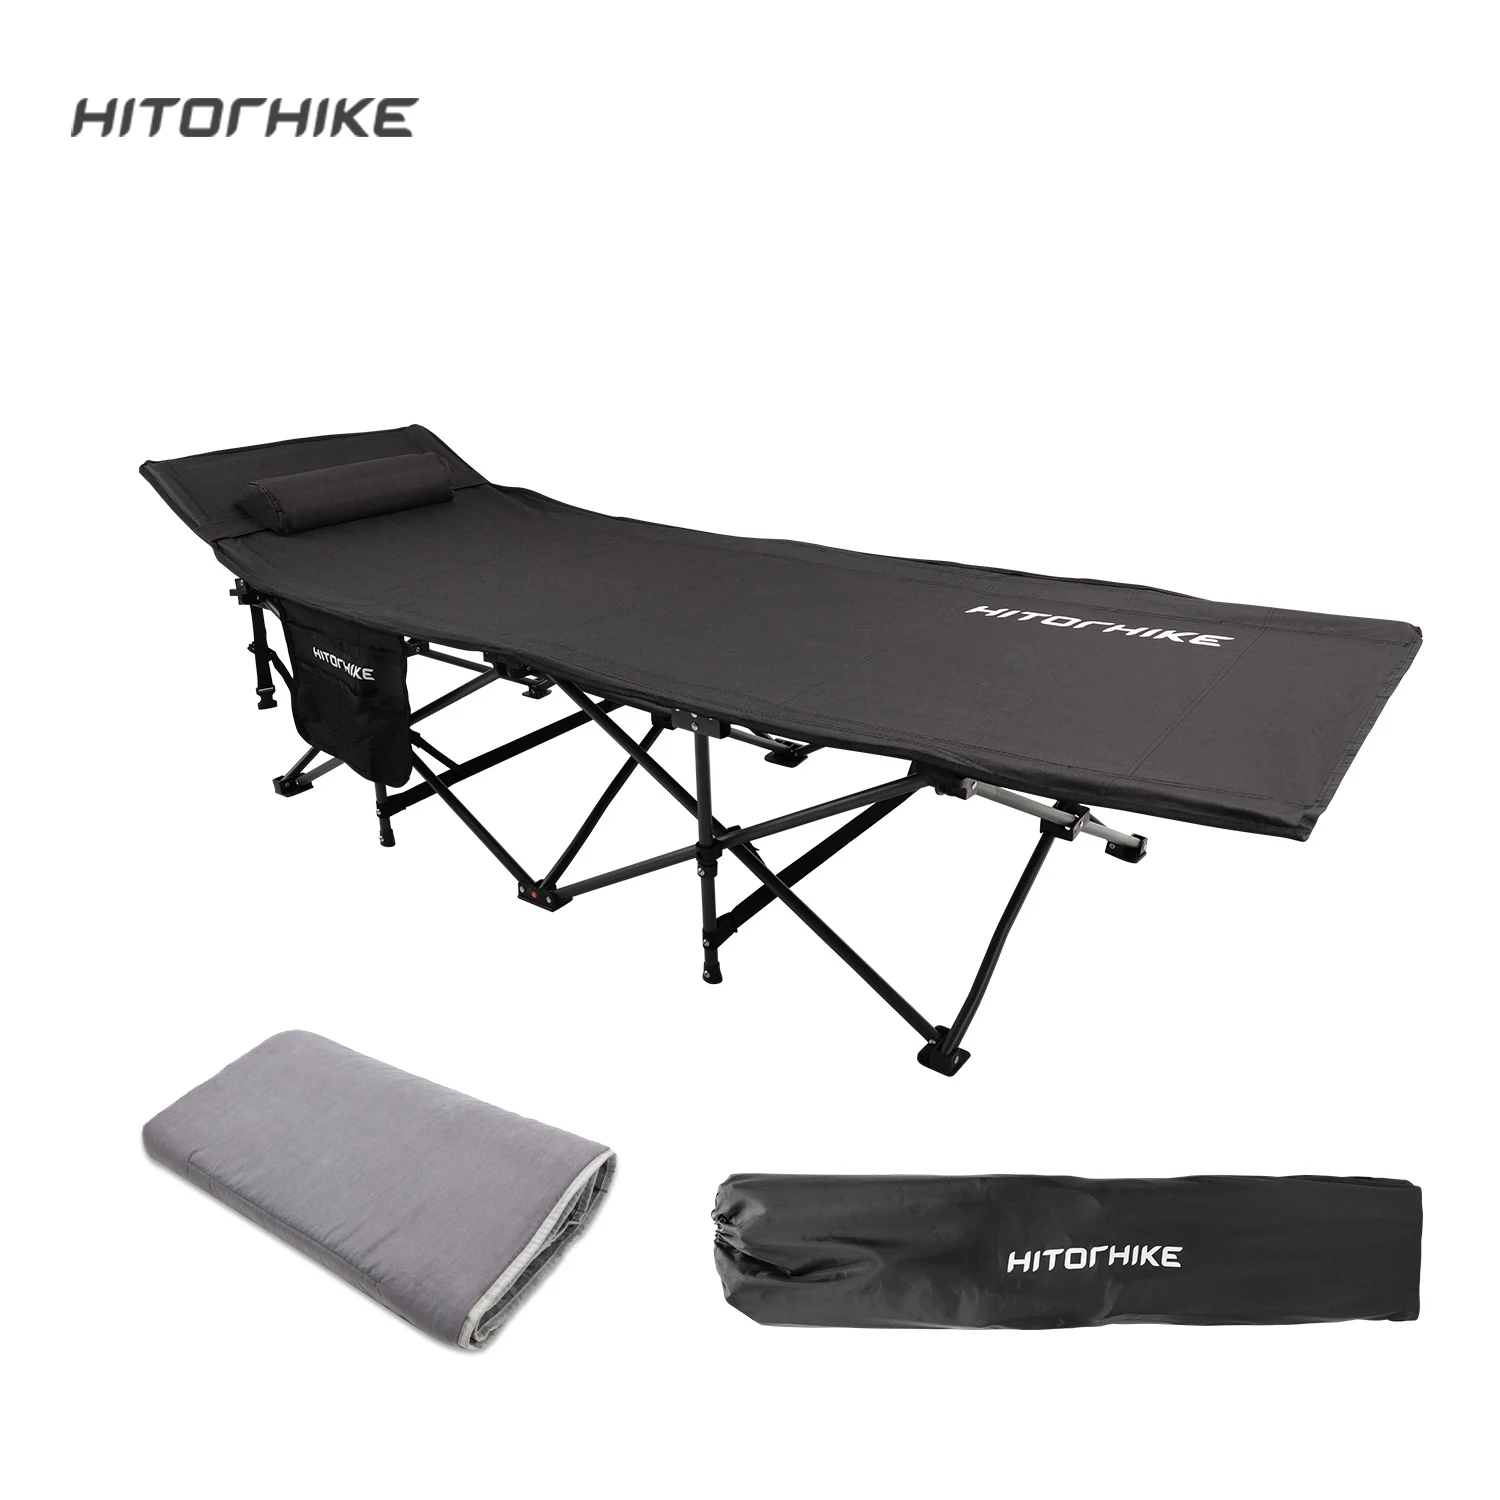 

Hitorhike new style iron frame folding camping cot sleeping bed portable outdoor cots